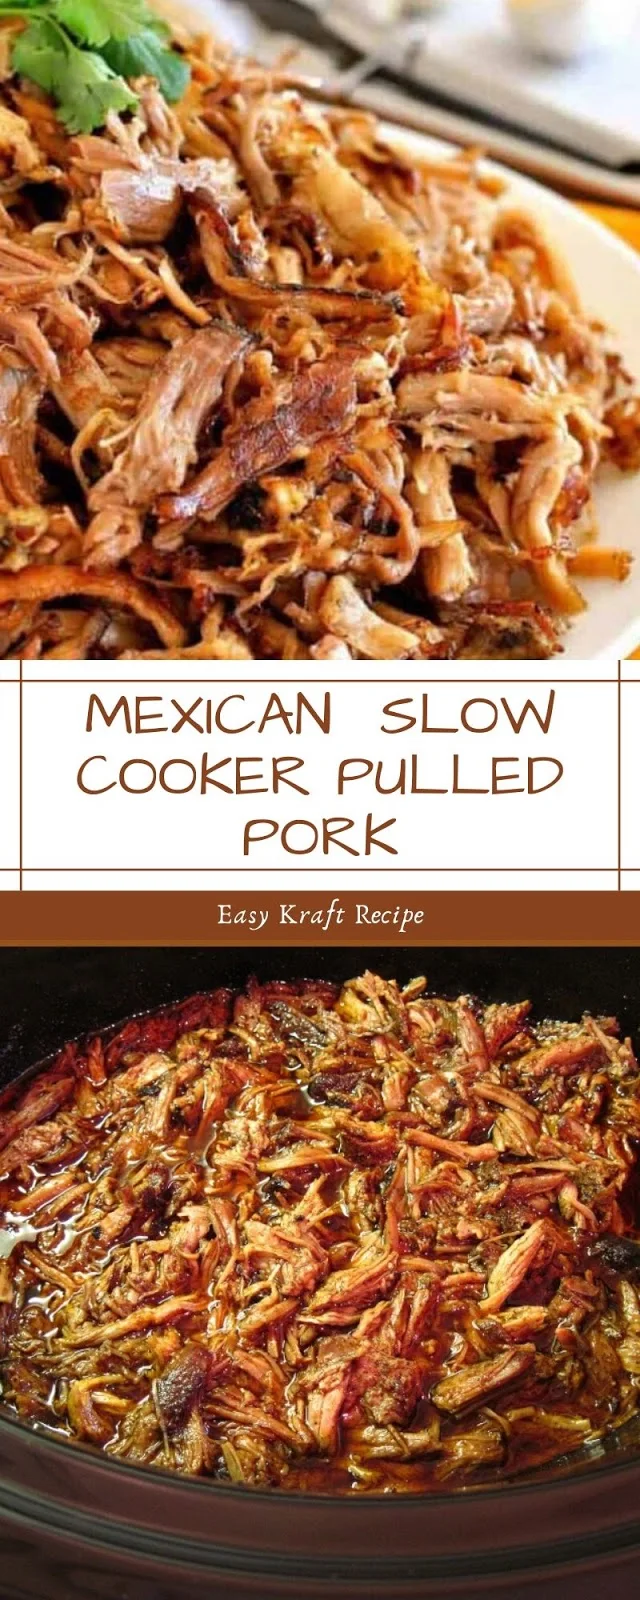 MEXICAN  SLOW COOKER PULLED PORK